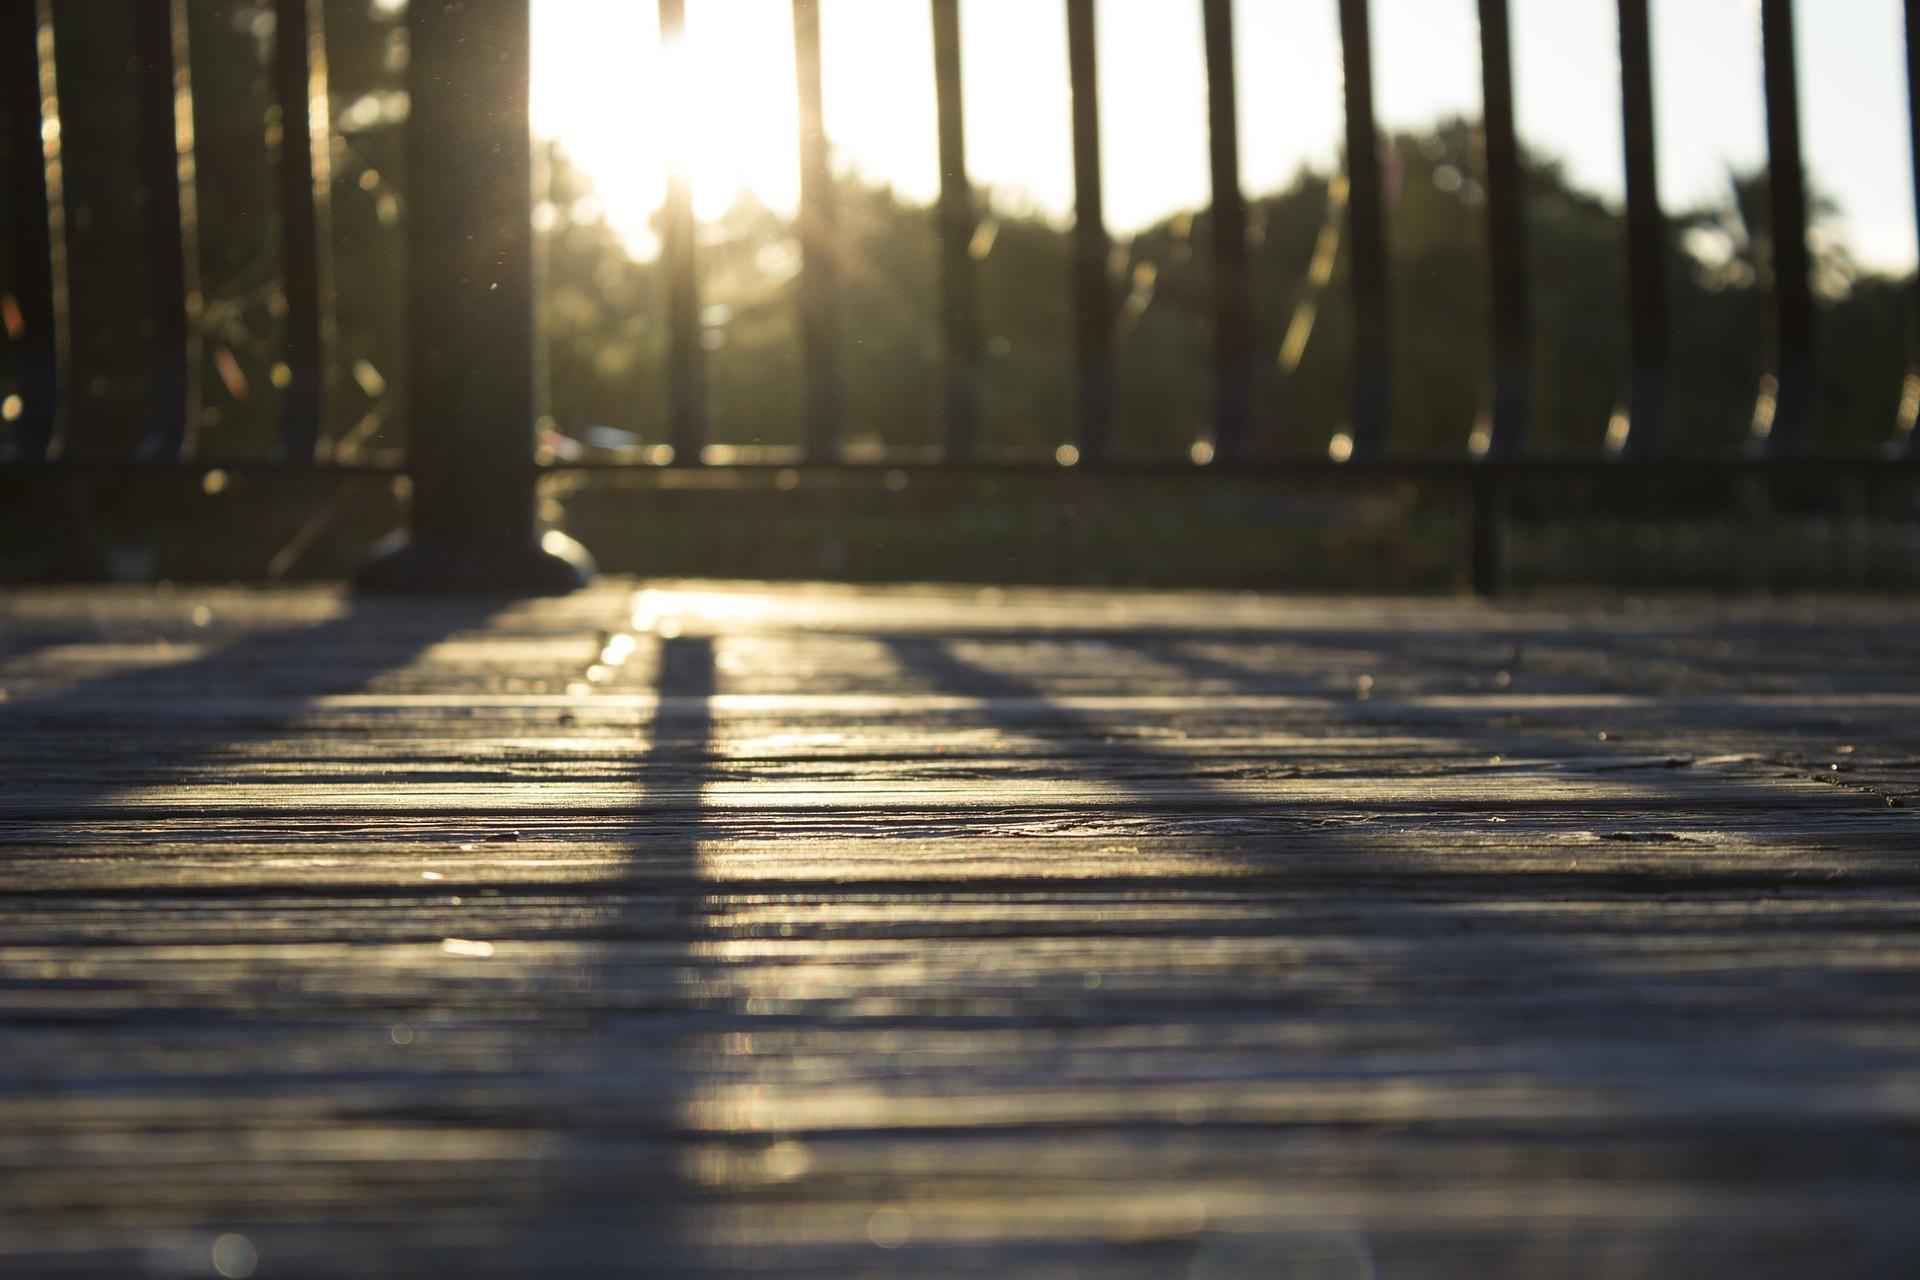 A person's shadow on a wooden deck needing repair.